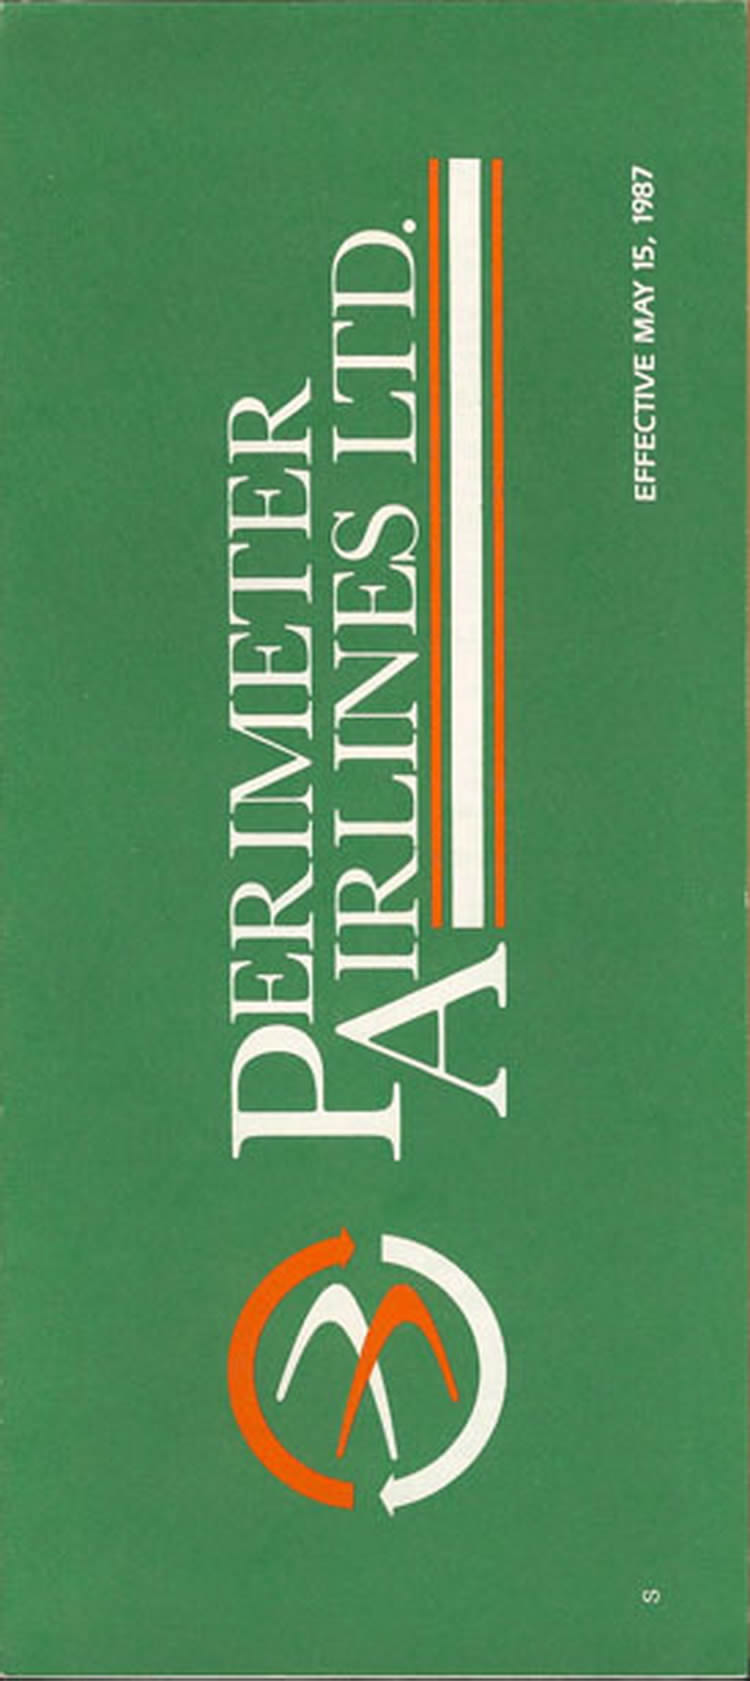 vintage airline timetable for Perimeter Airlines